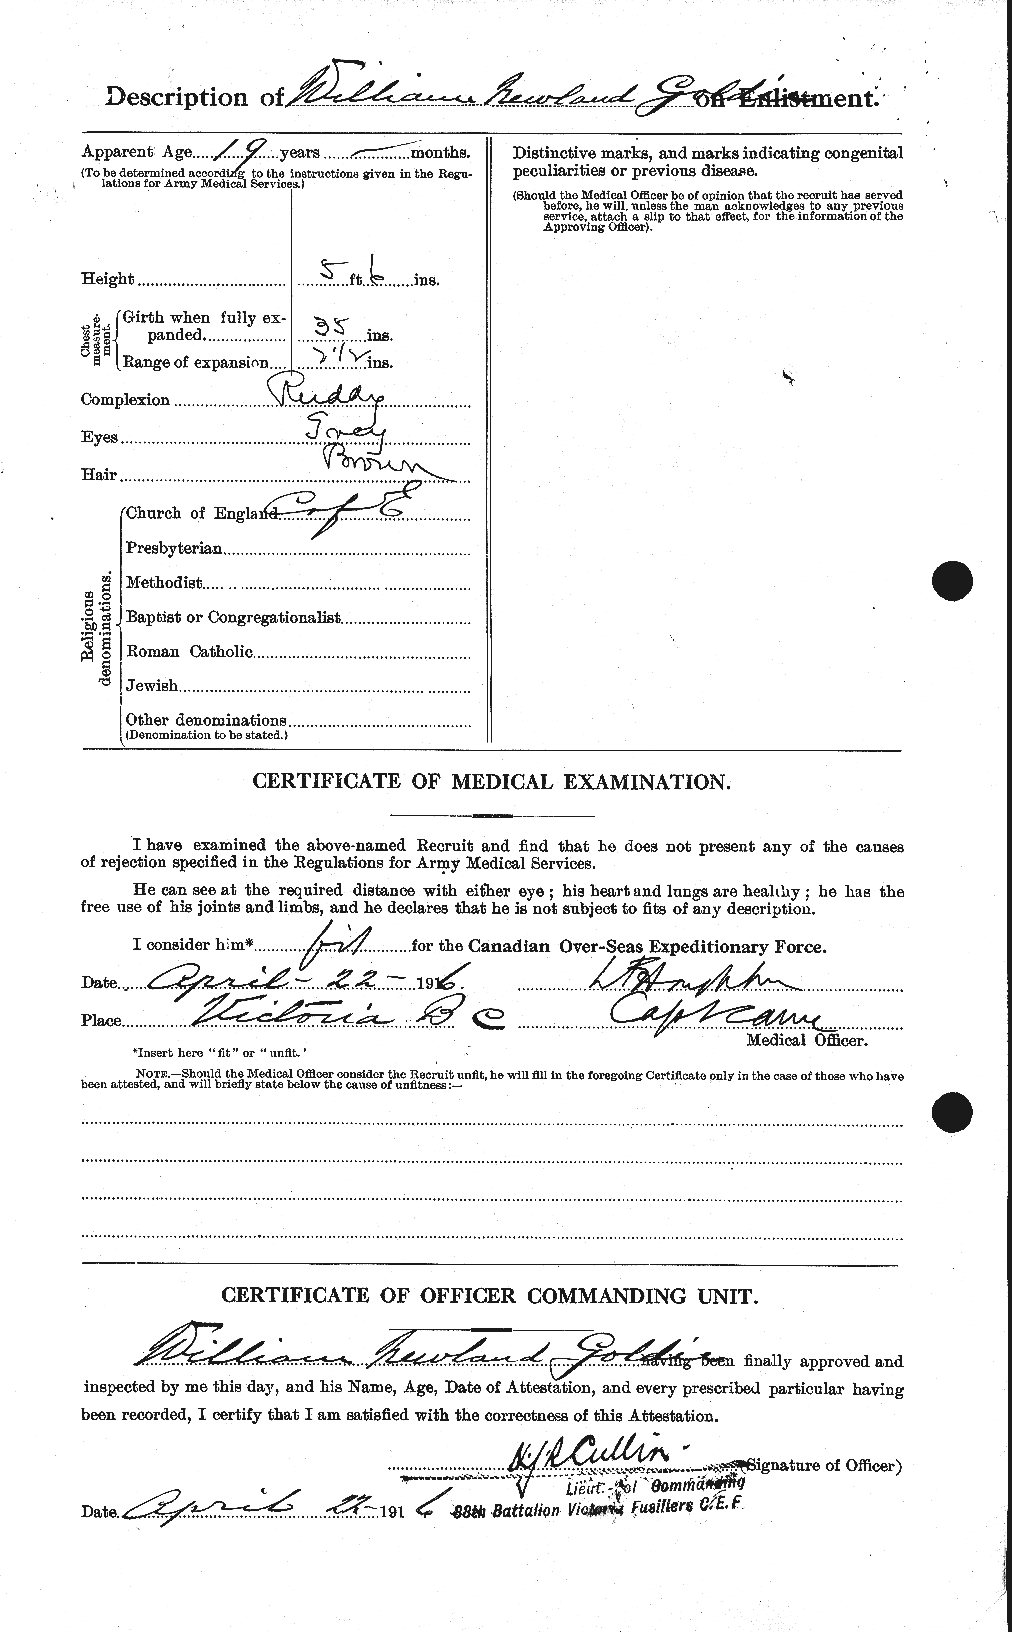 Personnel Records of the First World War - CEF 353958b